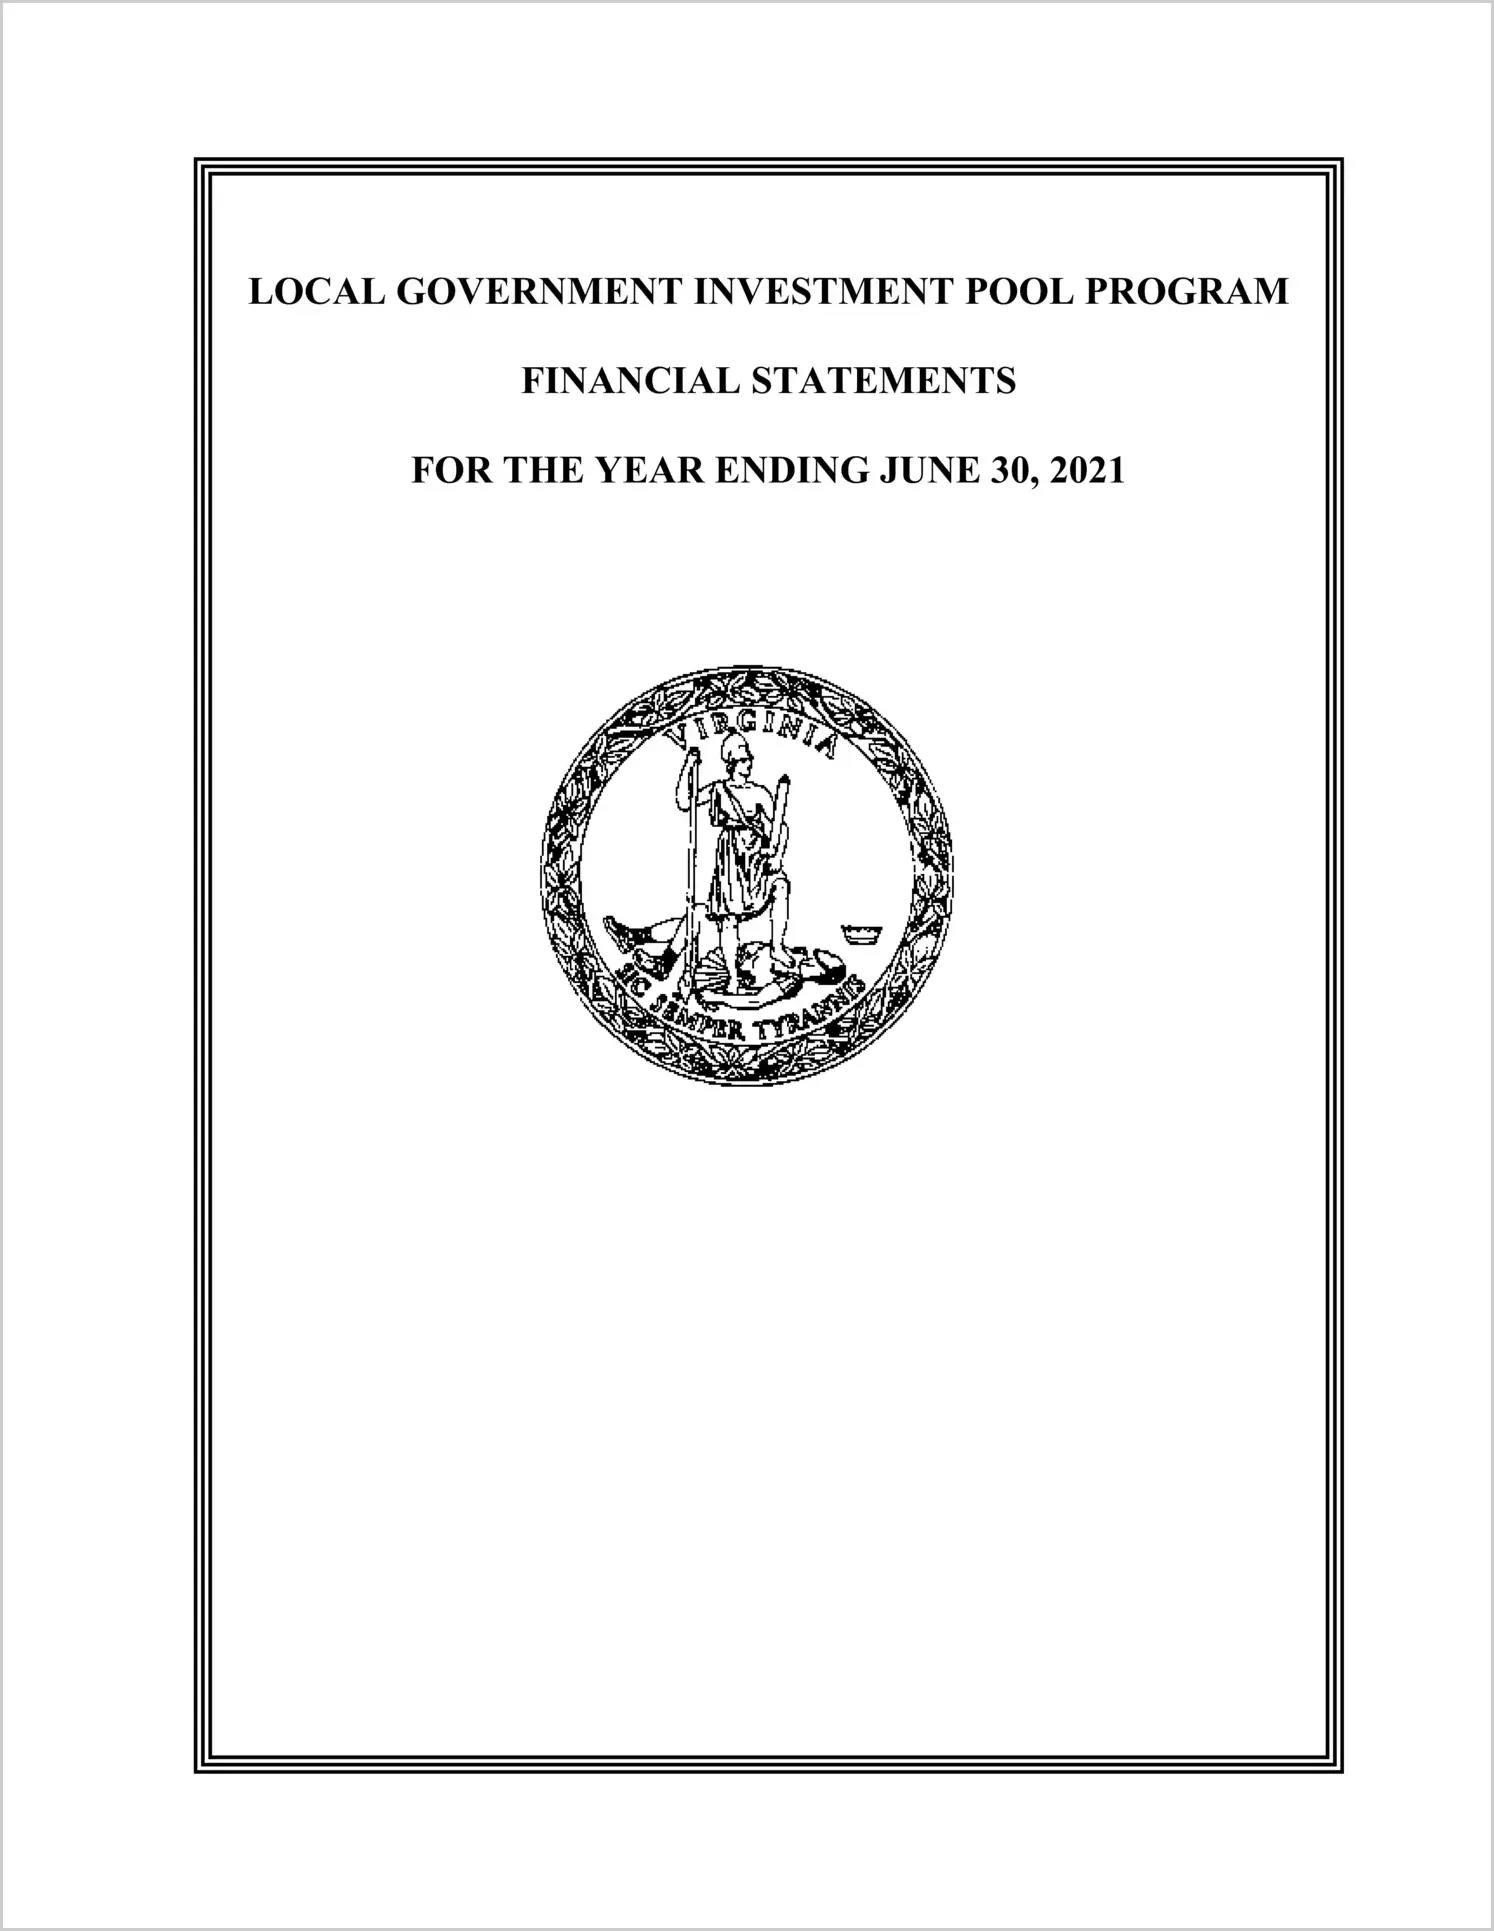 Local Government Investment Pool Program Financial Statements for the year ended June 30, 2021